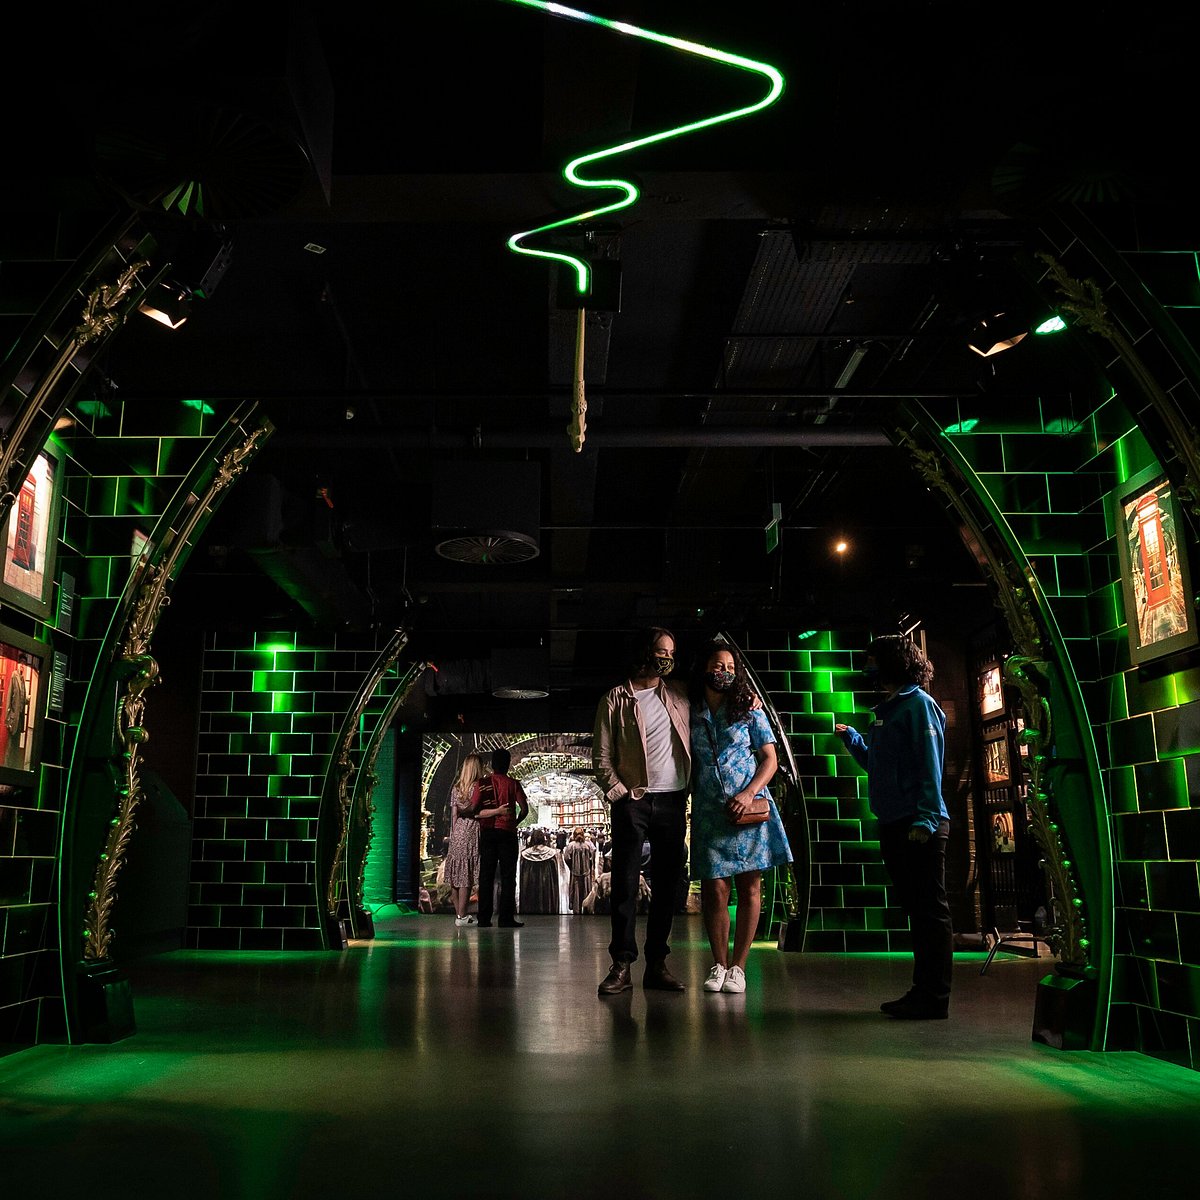 Early Access Tickets to Harry Potter: The Exhibition for Harry Potter Fan  Club Members